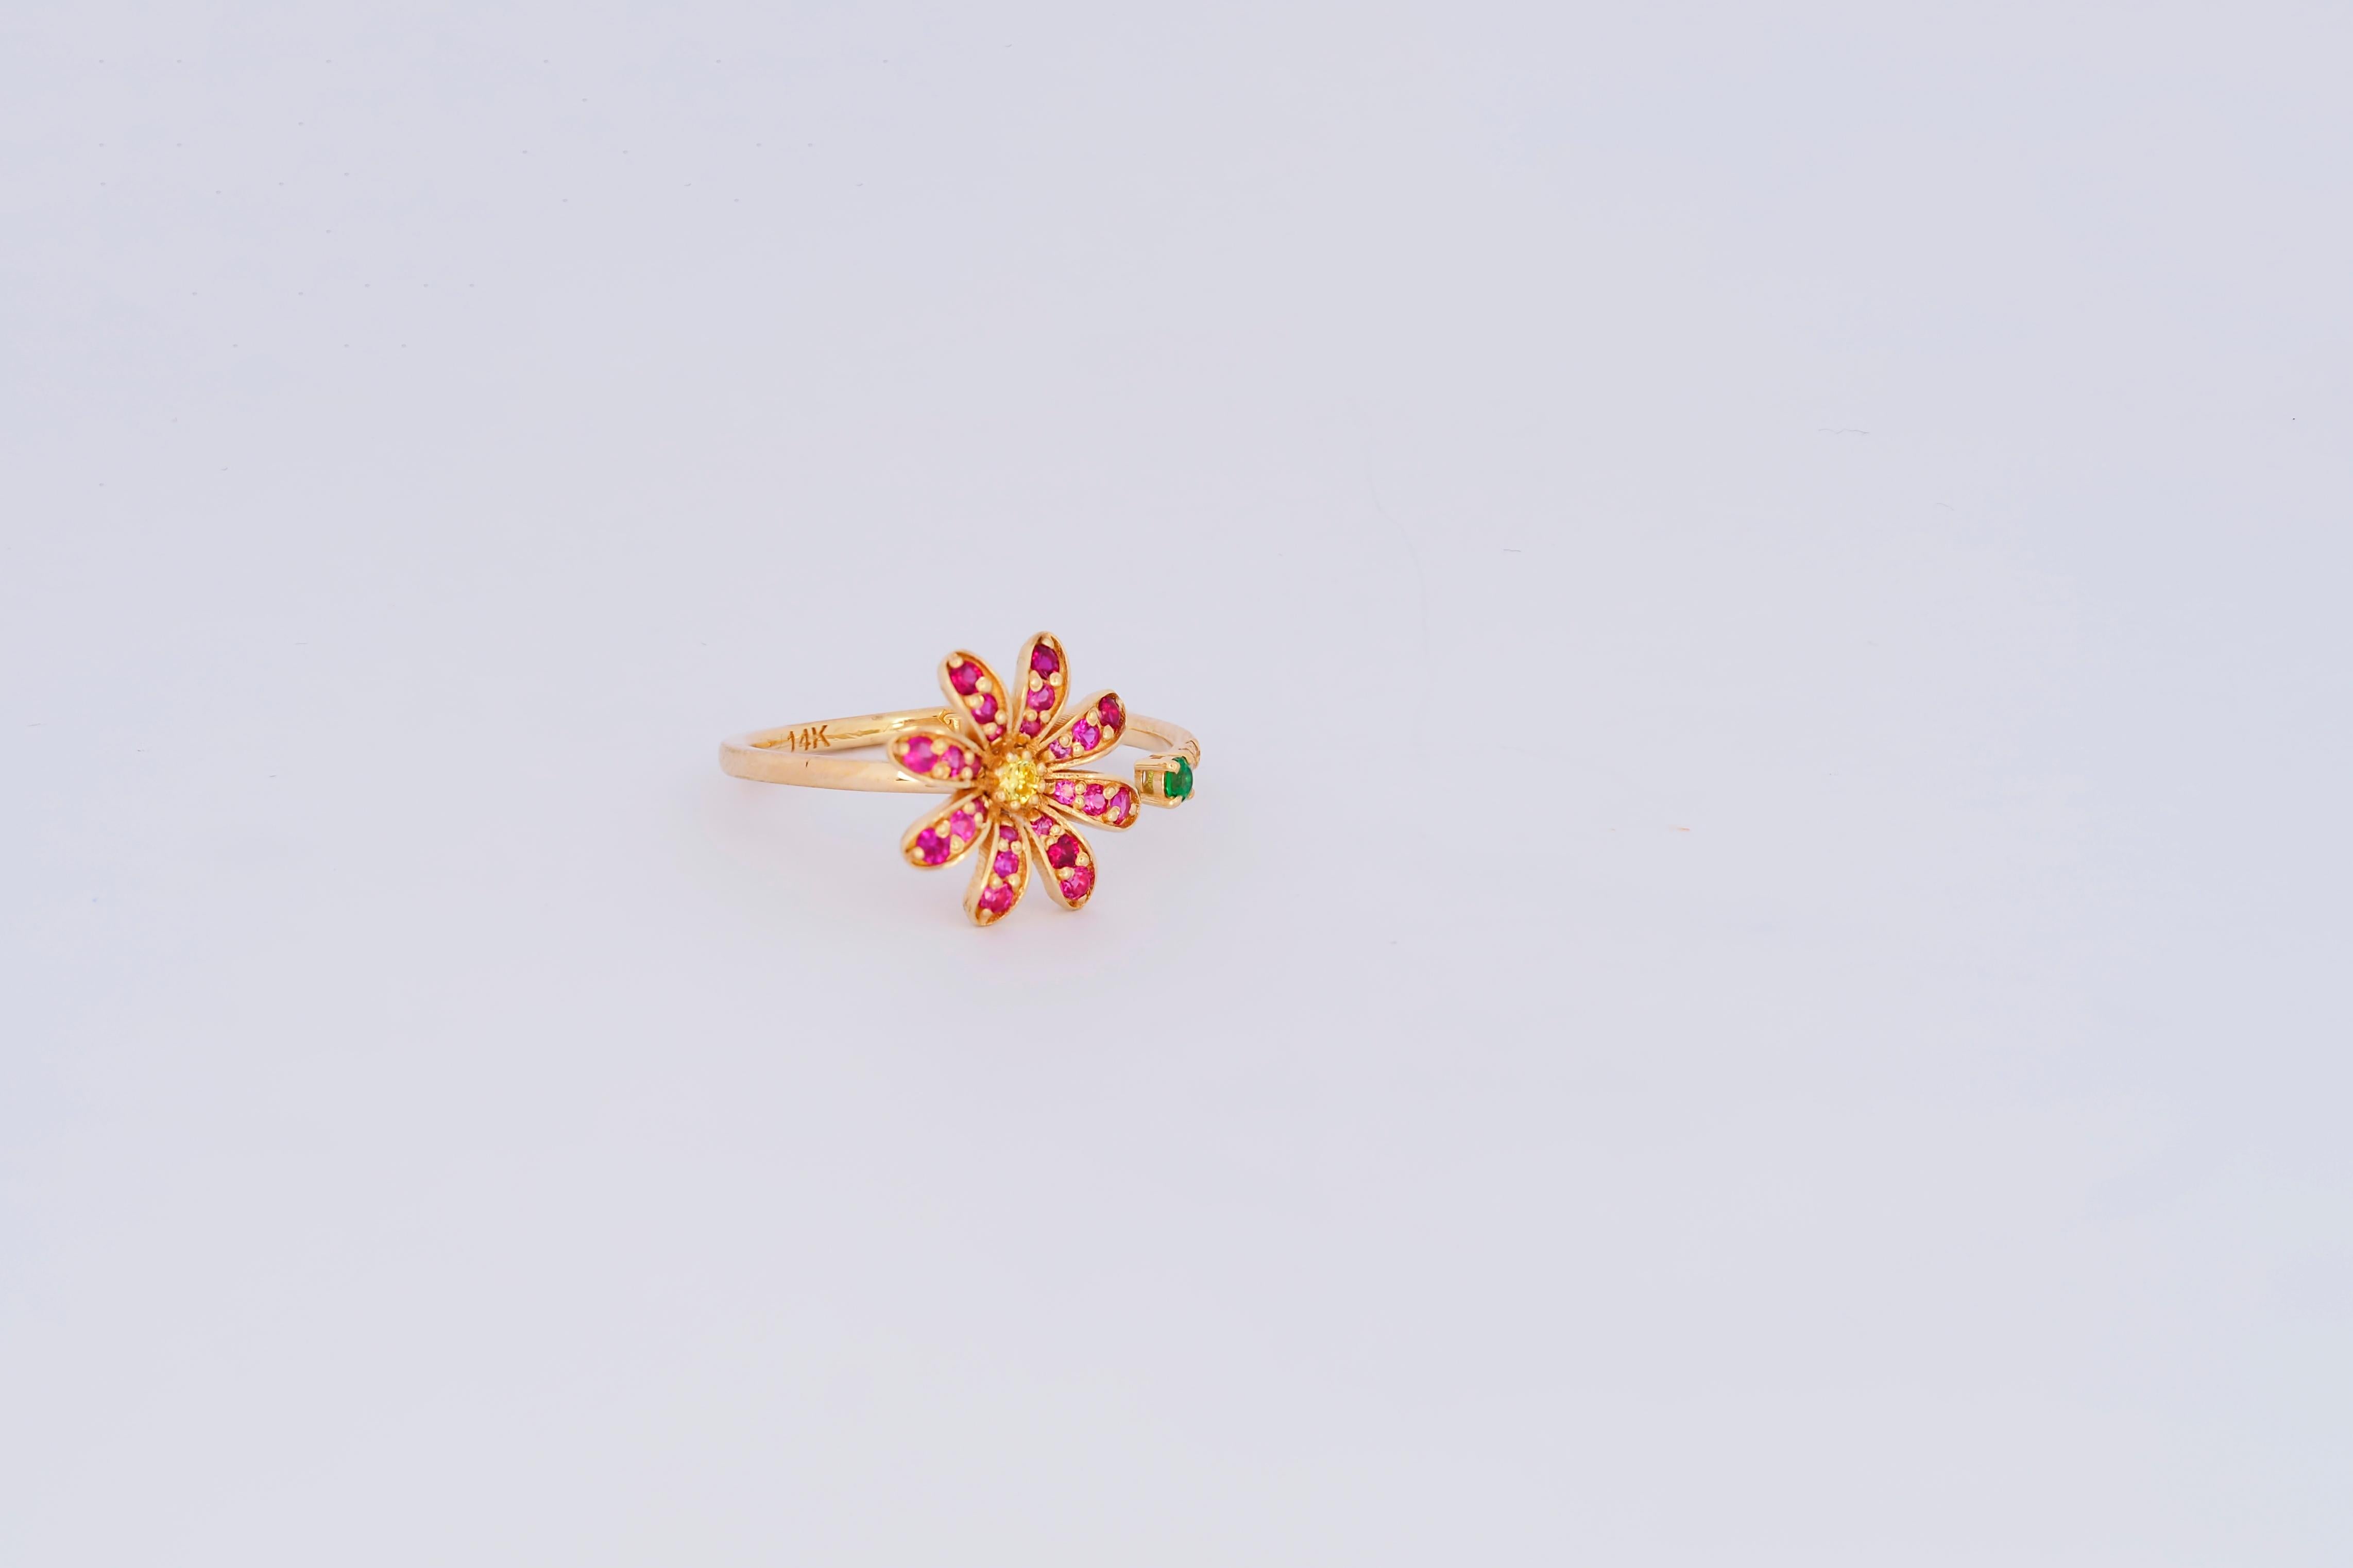 Open ended flower ring in 14k gold. Lab ruby, emerald, moissanites gold ring. Adjustable ring. Red gemstone flower ring. 

Metal: 14k gold
Weight: 2.3 gr depends from size

Gemstones:
Lab rubies: red color, round brilliant cut
Lab sapphire: yellow